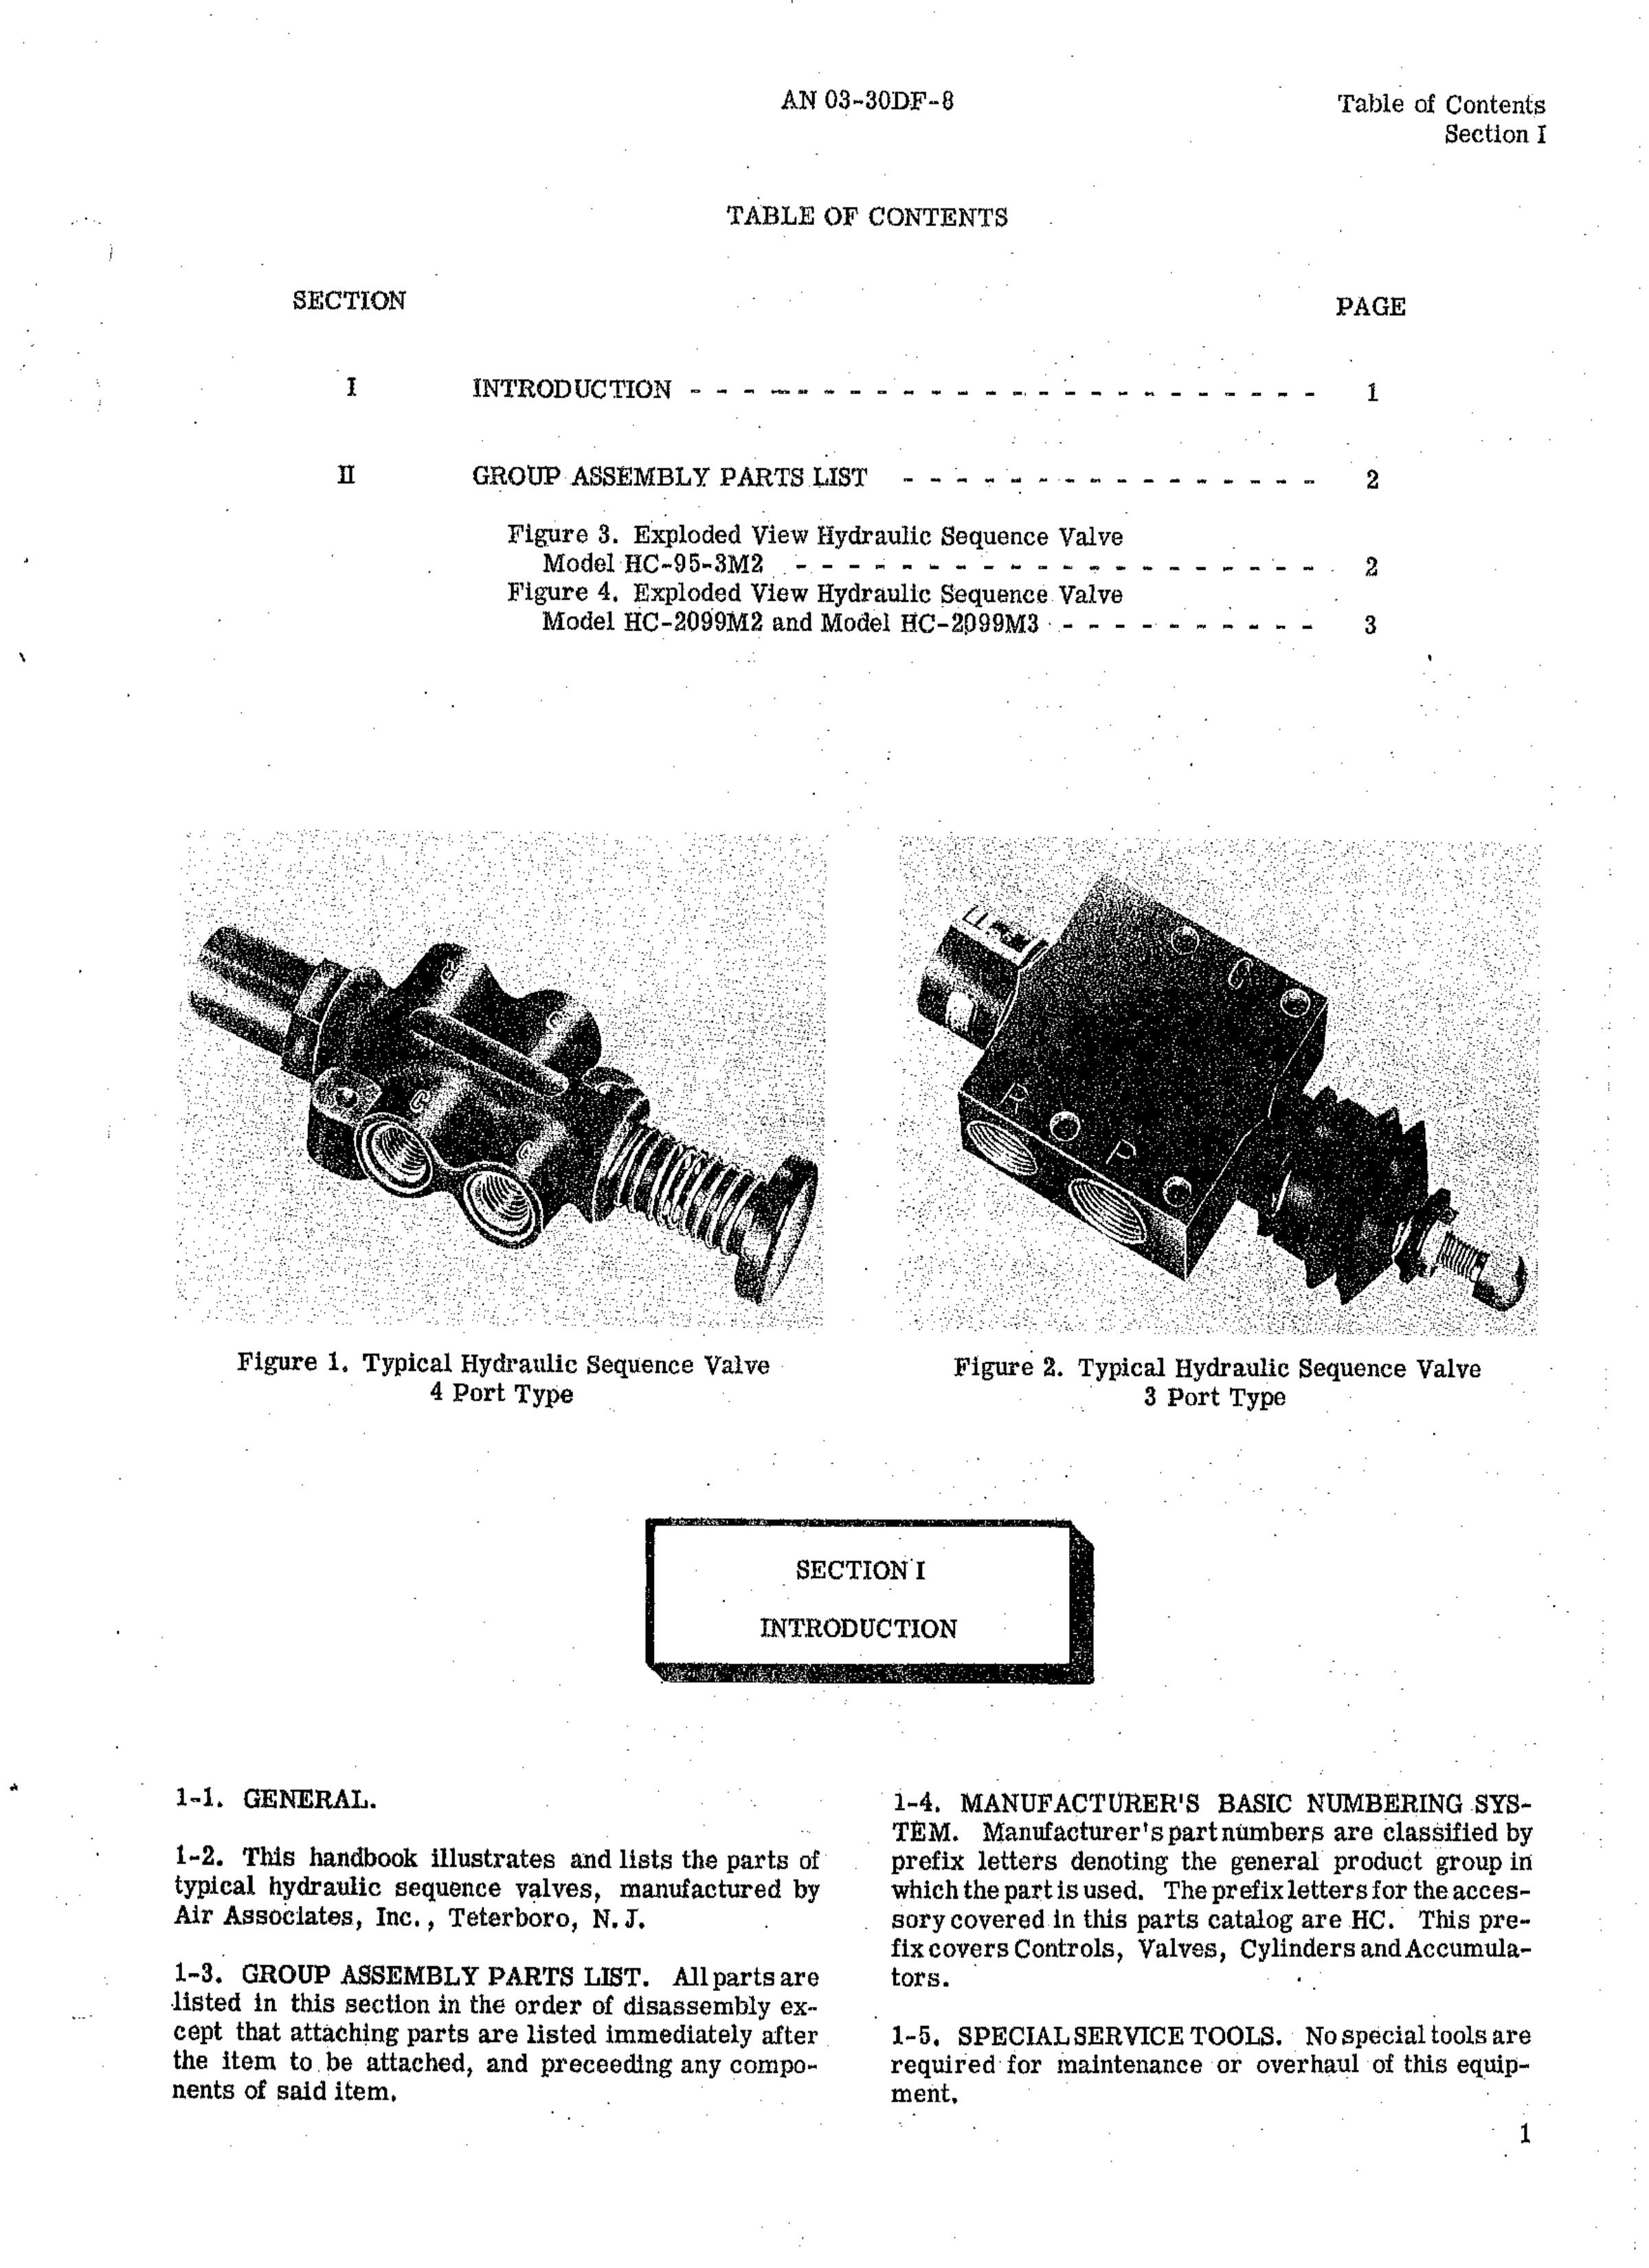 Sample page 3 from AirCorps Library document: Parts Catalog for Hydraulic Sequence Valves